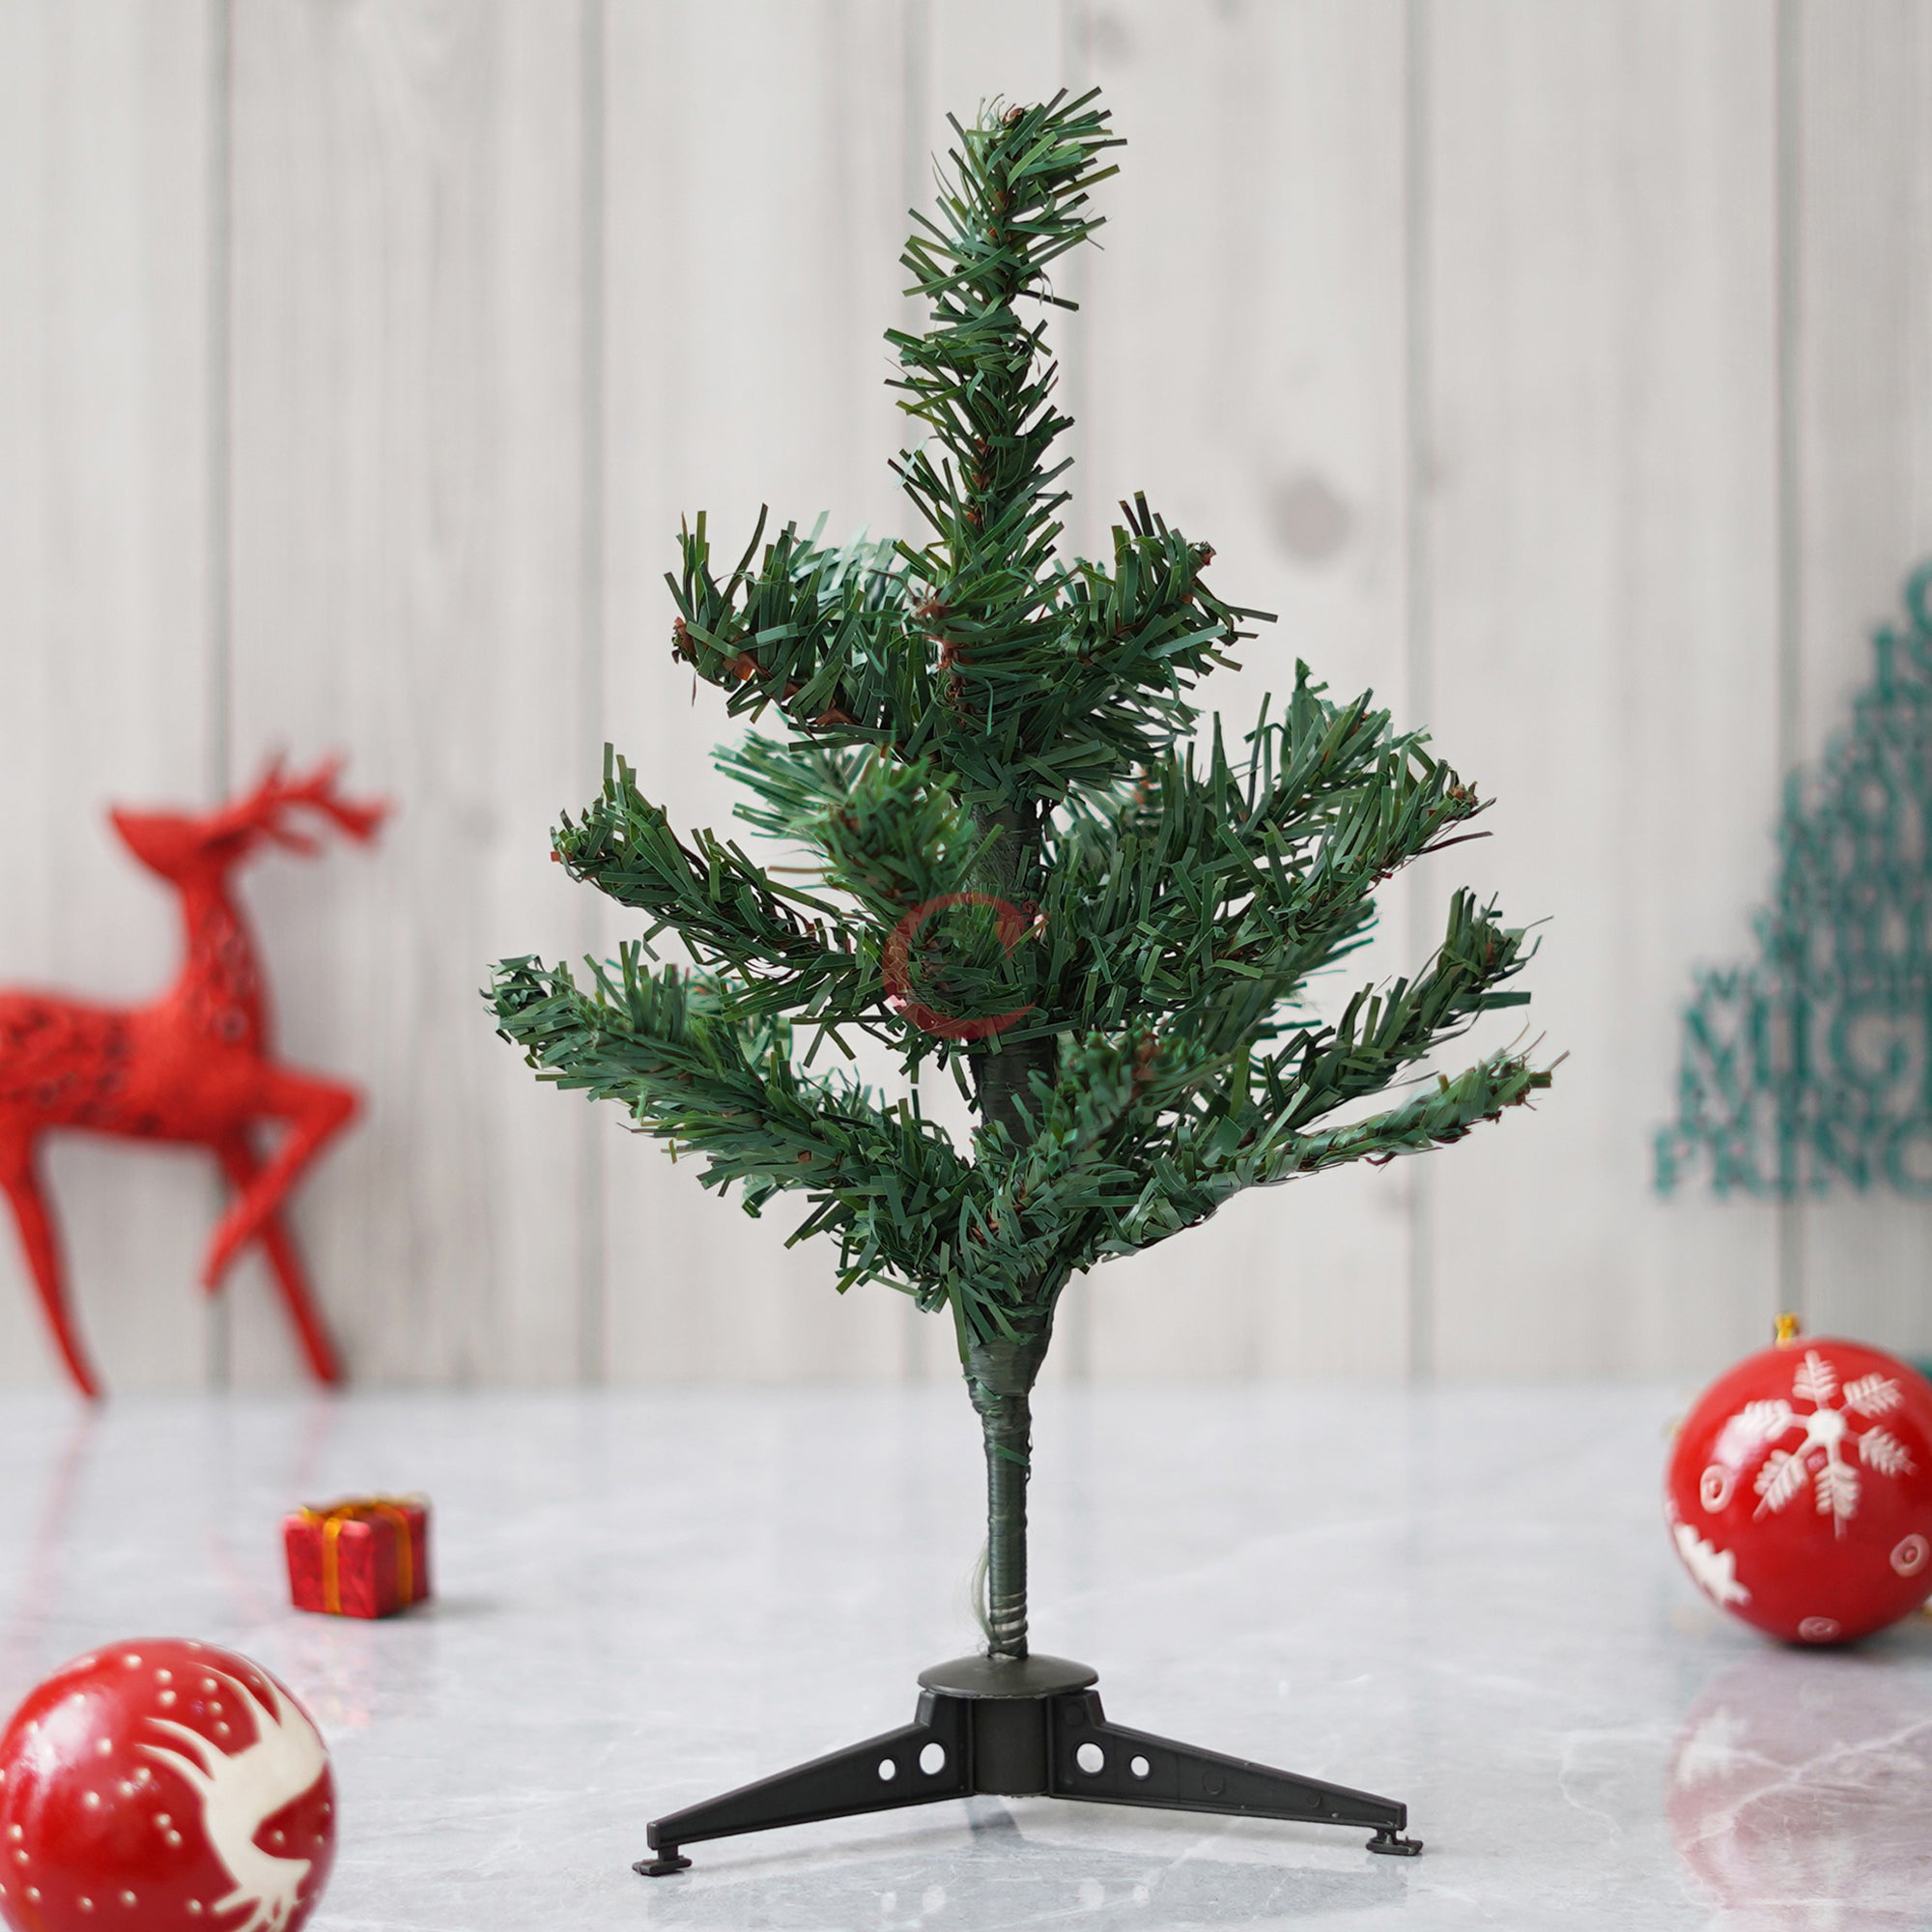 eCraftIndia 1 Feet Green Artificial Christmas Tree Xmas Pine Tree with Stand and 40 Christmas Decoration Ornaments Props - Merry Christmas Decoration Item for Home, Office, and Church 4